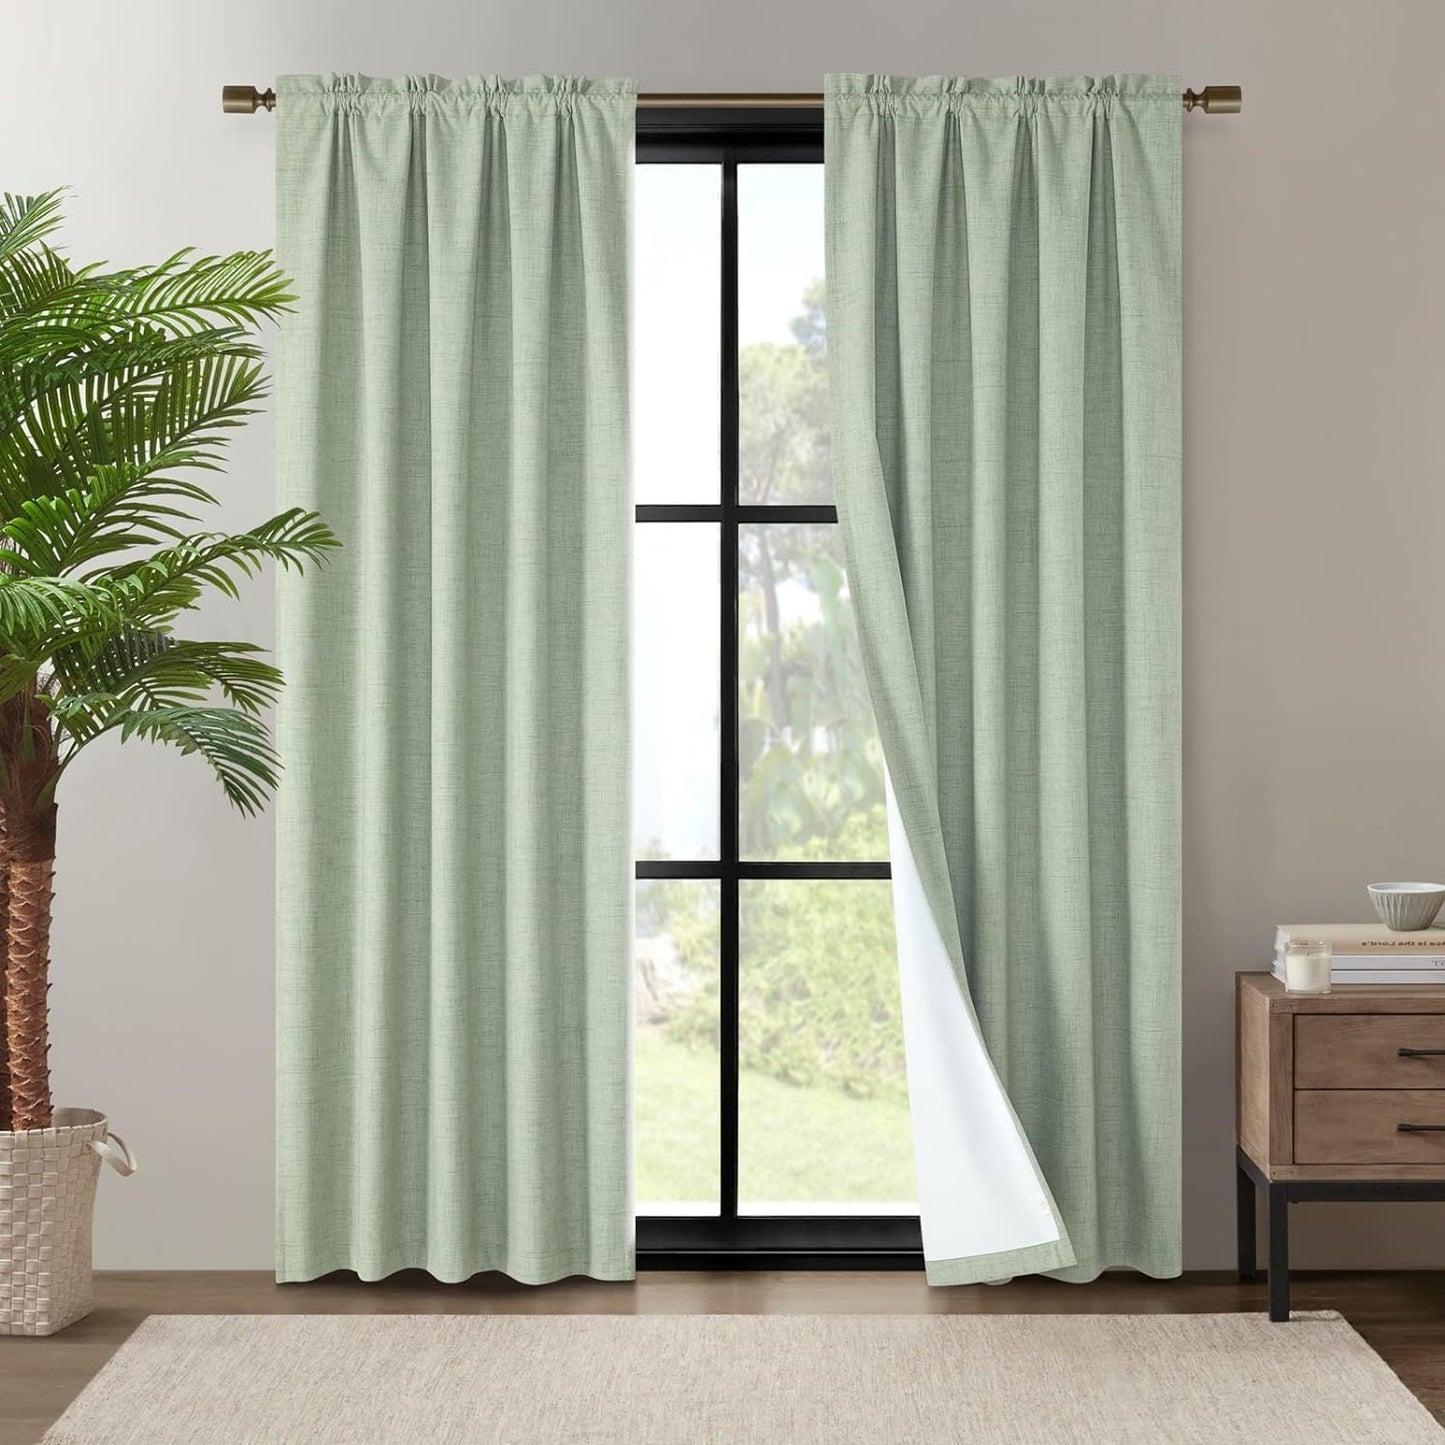 Dreaming Casa Linen Blackout Curtains for Beadroom 2 Panels 102 Inch Long Living Room Drapes Boho Rustic 100% Black Out White Window Curtain with Rod Pocket, 52" W X 102" L  Dreaming Casa Green, Rod Pocket 2 X (100"W X 102"L) 